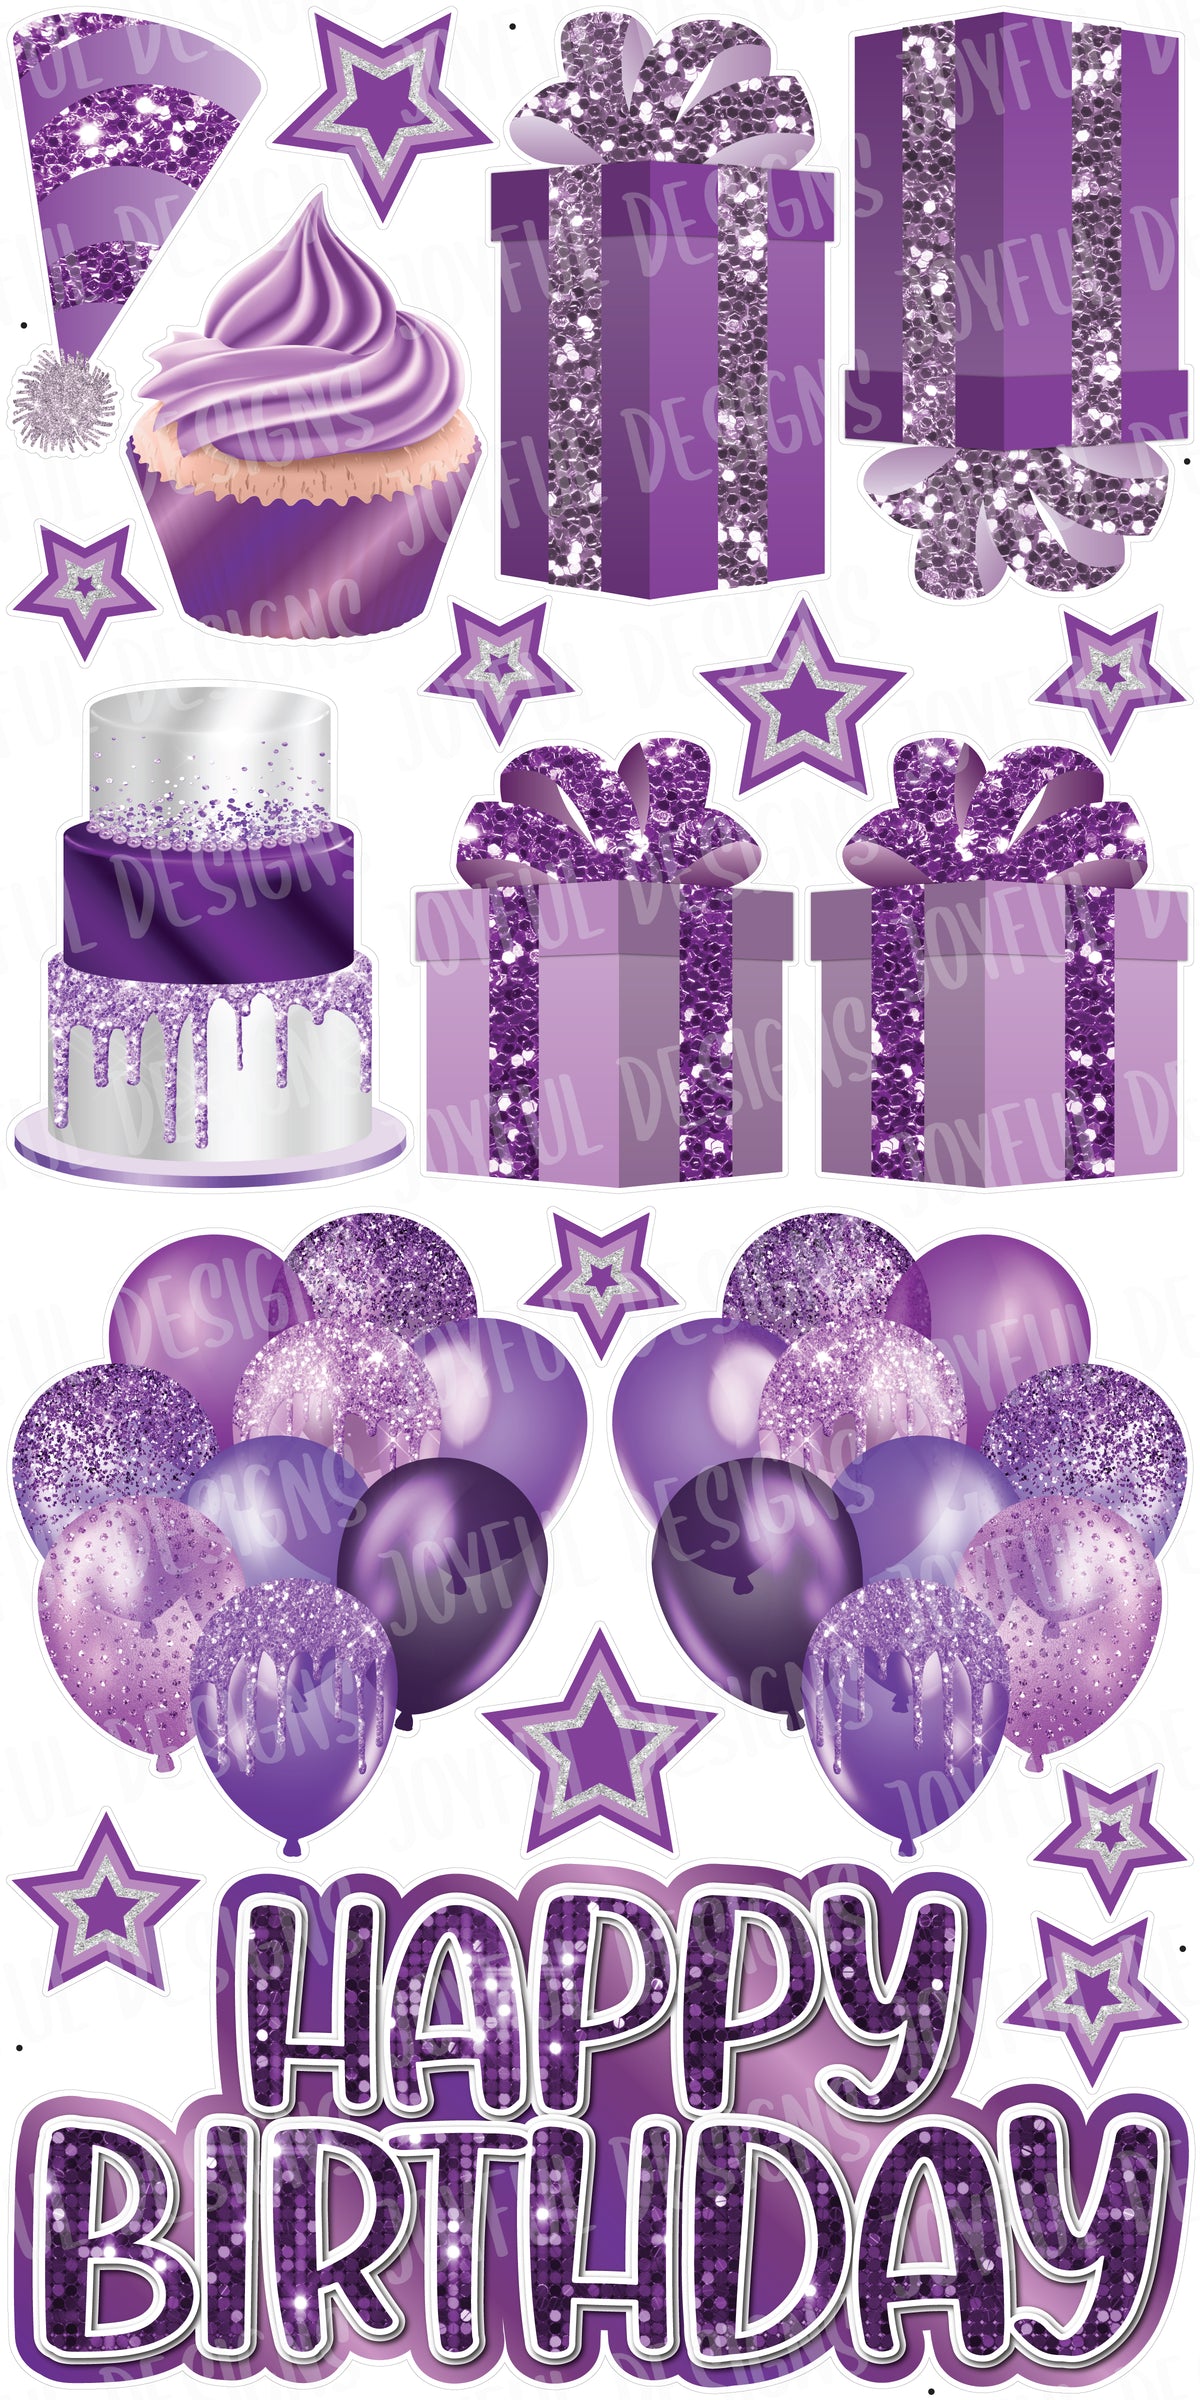 All The Purples "One and Done" Birthday Set